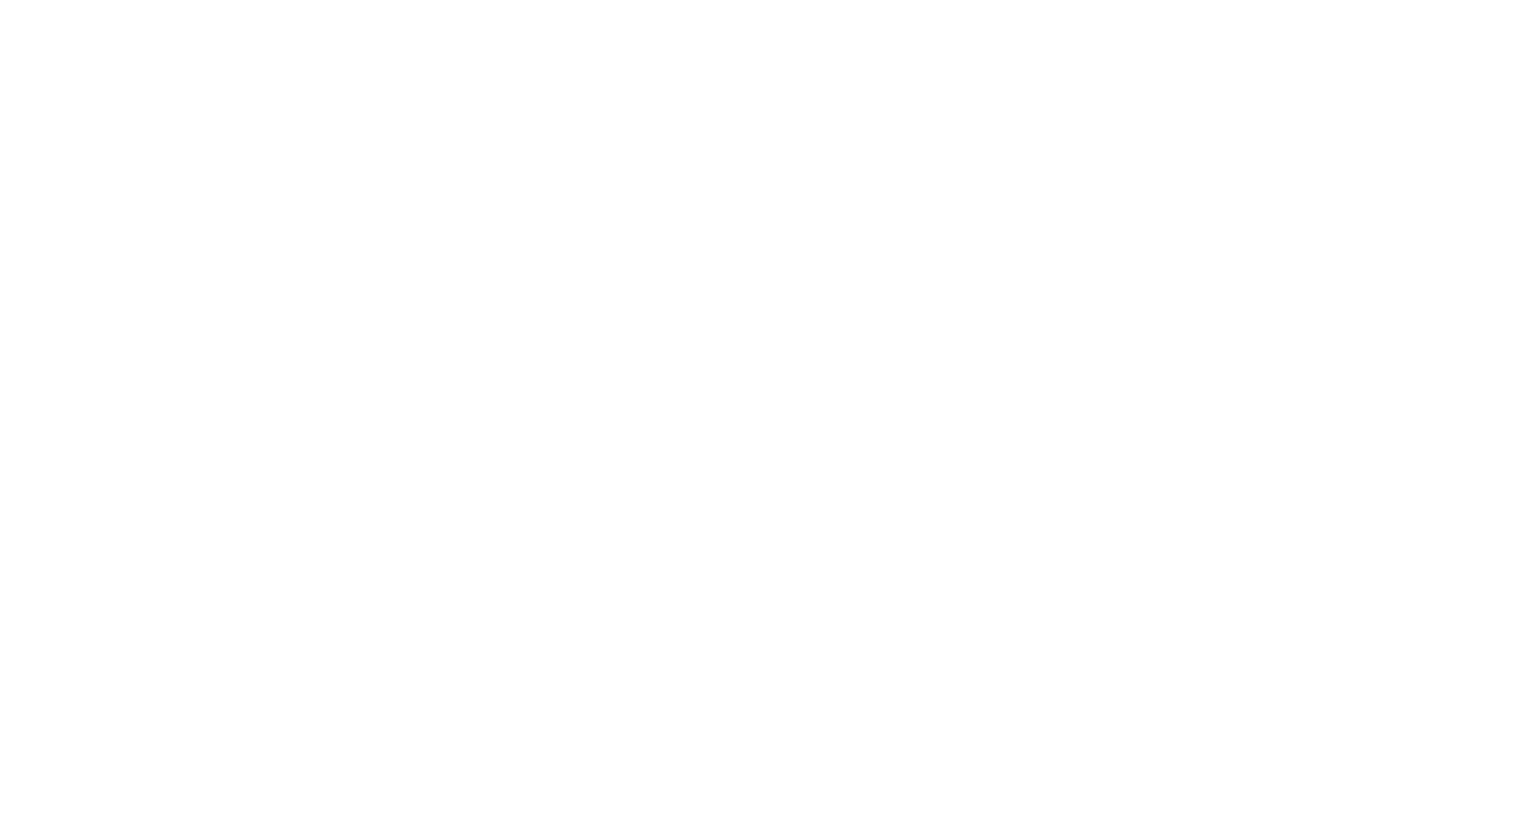 Aether Industries logo large for dark backgrounds (transparent PNG)